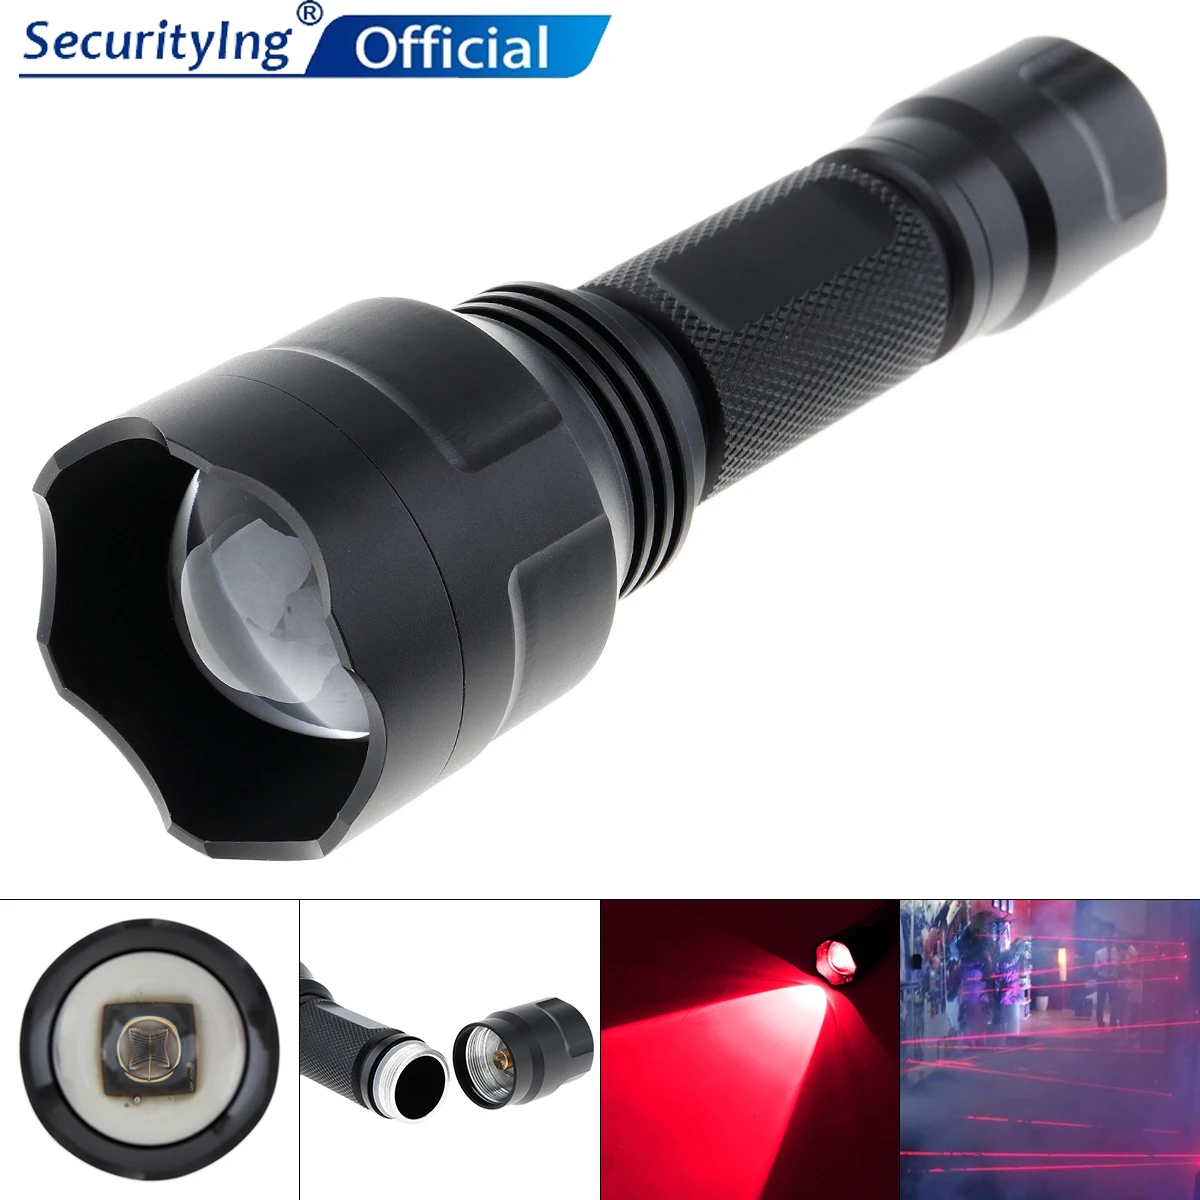 

Zoomable Infrared Light Waterproof Rotary Focusing C8 850nm IR 38mm Lens Night Vision Flashlight Torch for Camera